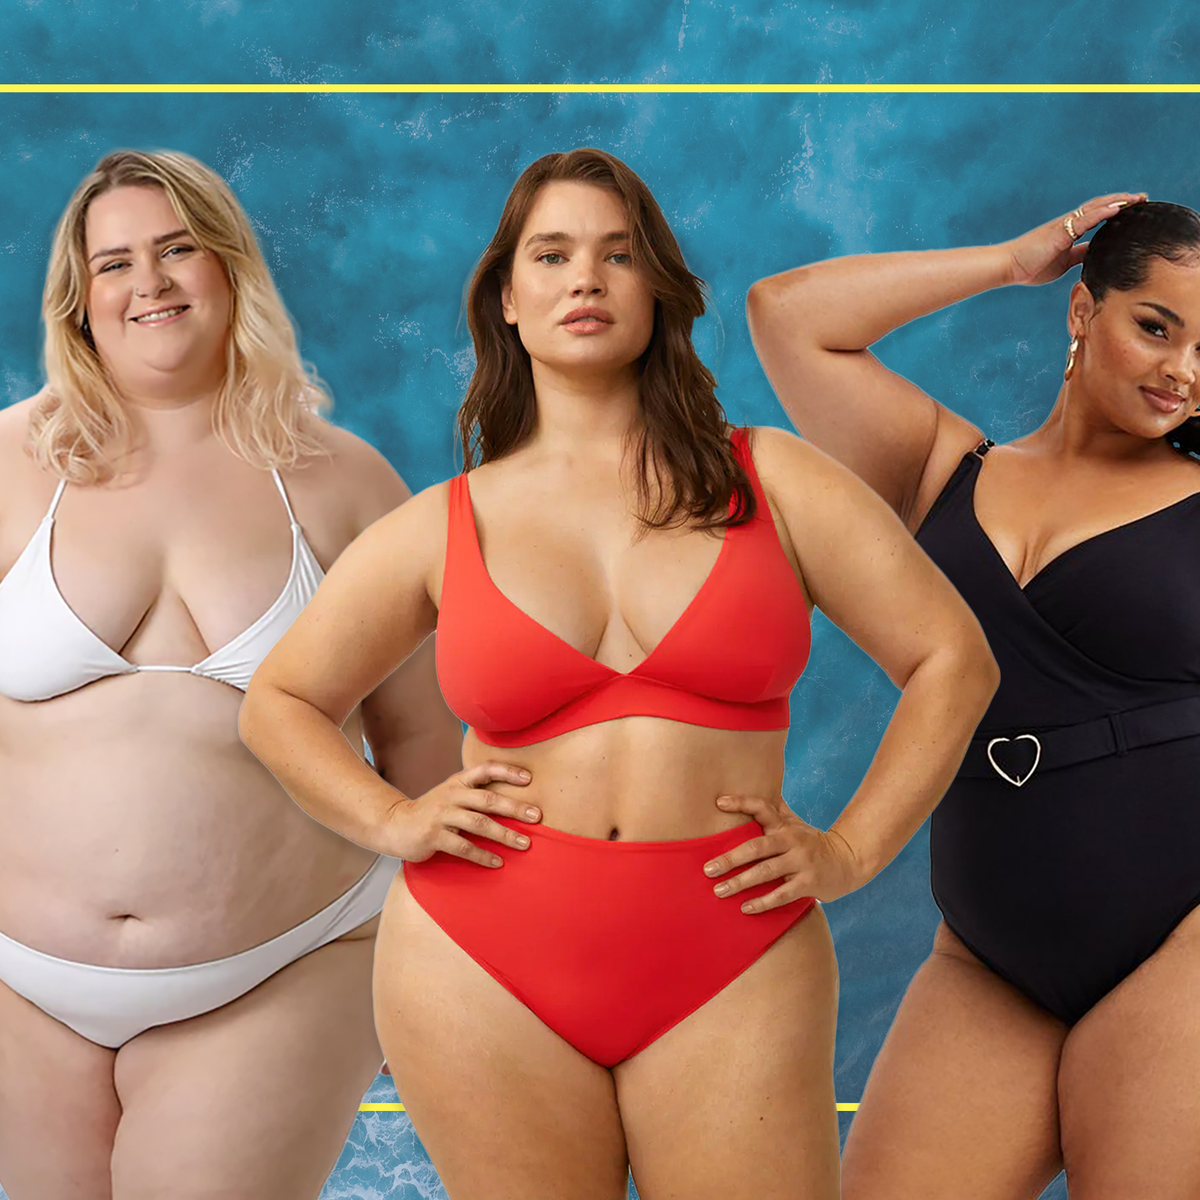 plus size swimwear brands fuller and figures | The Independent